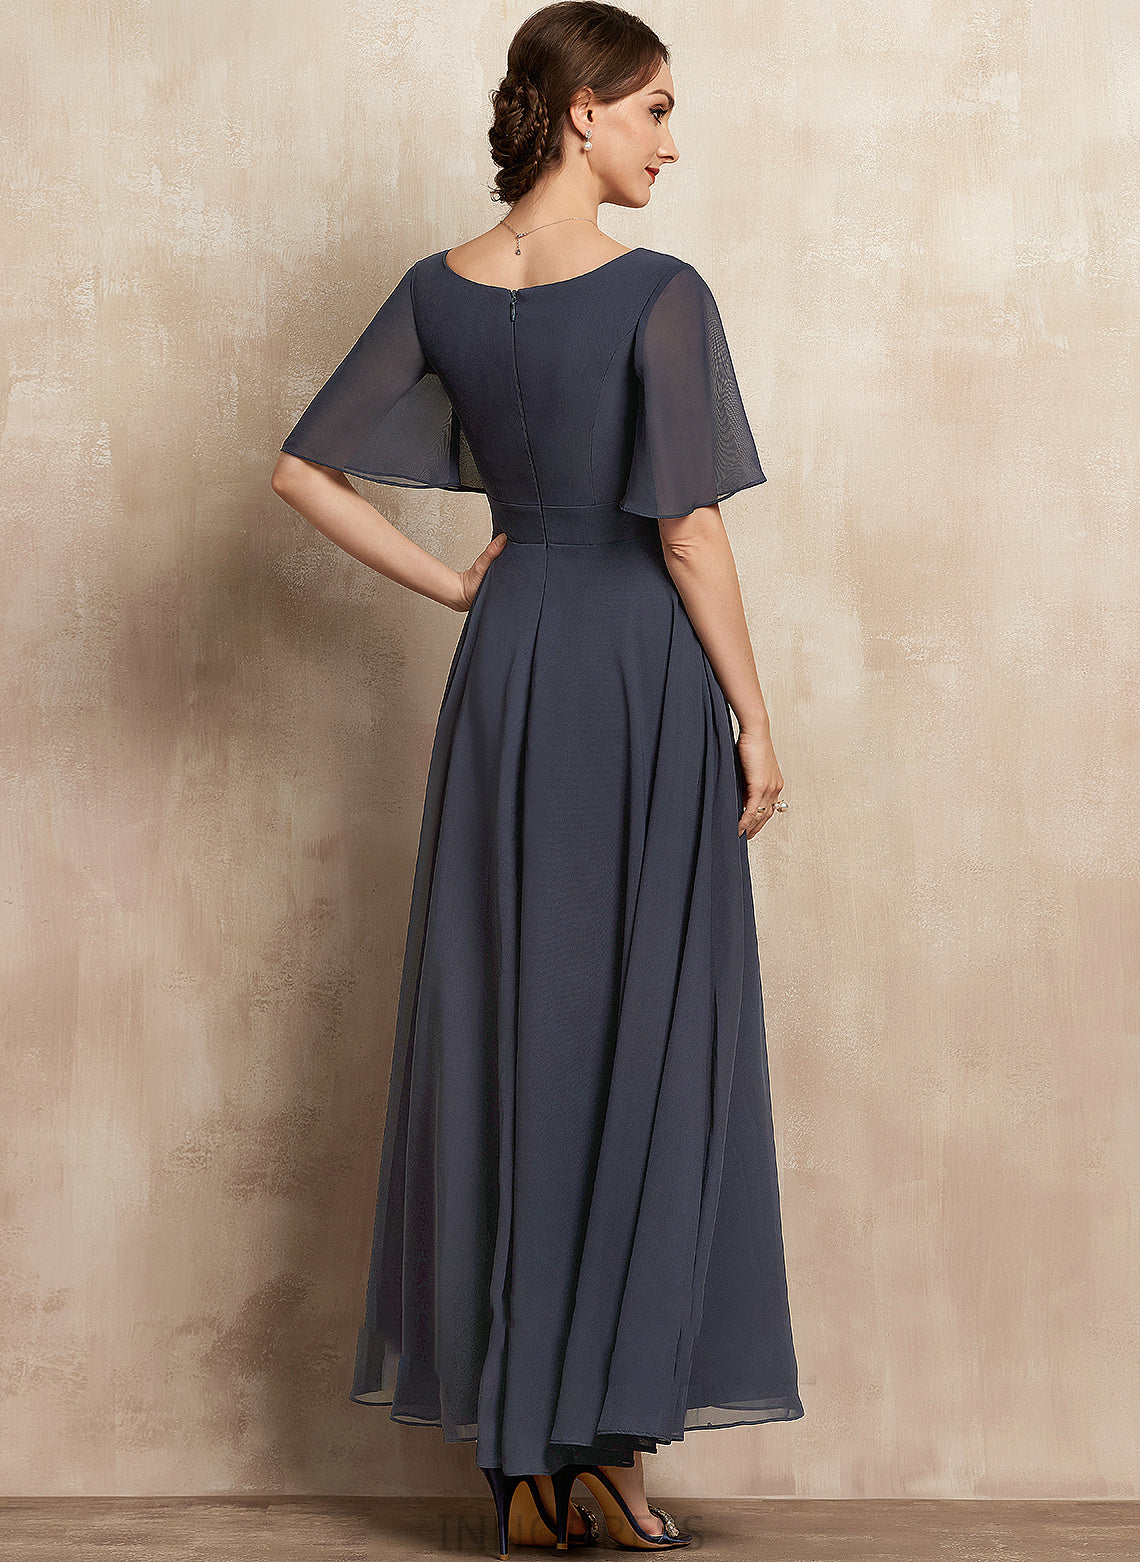 Sequins Beading Bride of Chiffon With Ruffle the A-Line Dress V-neck Mother of the Bride Dresses Ankle-Length Mother Zara